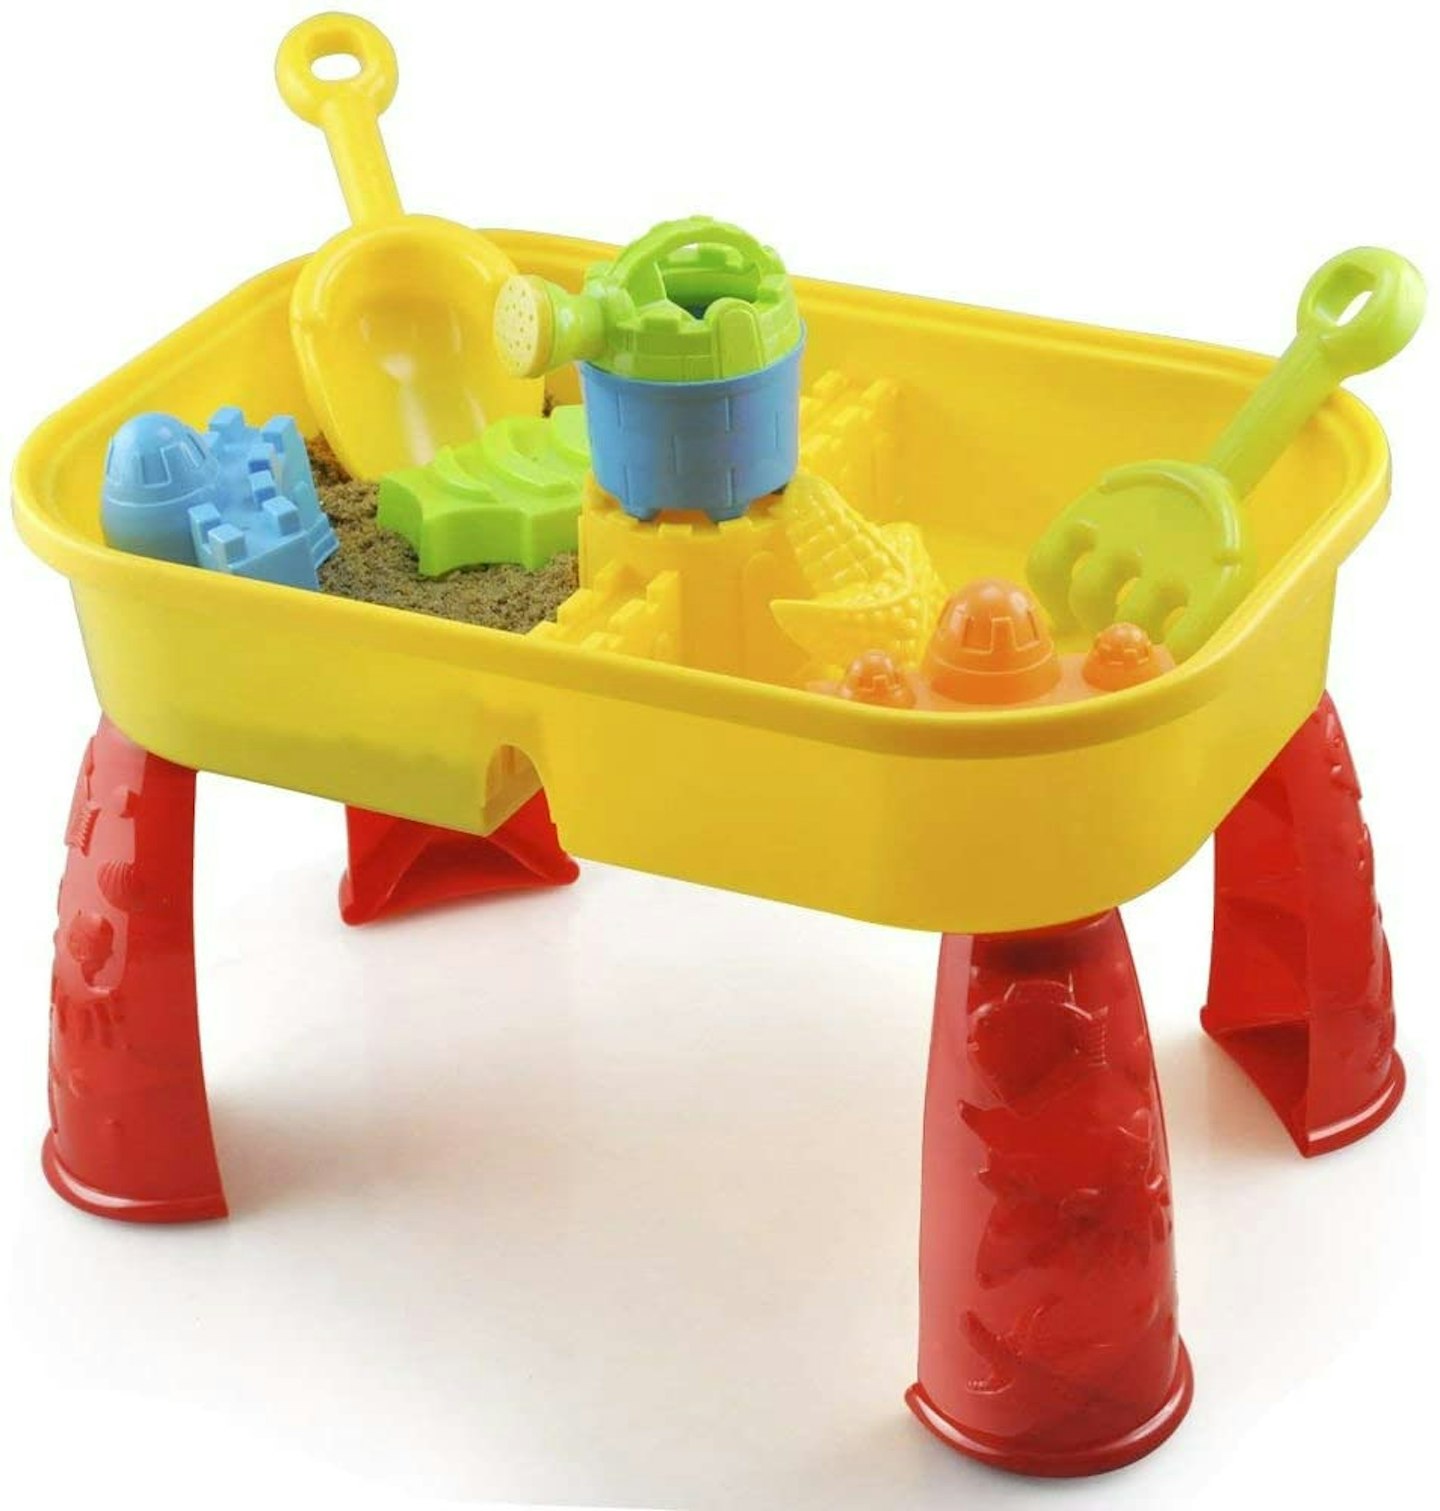 KandyToys Sand and Water Table with Lid and Accessories